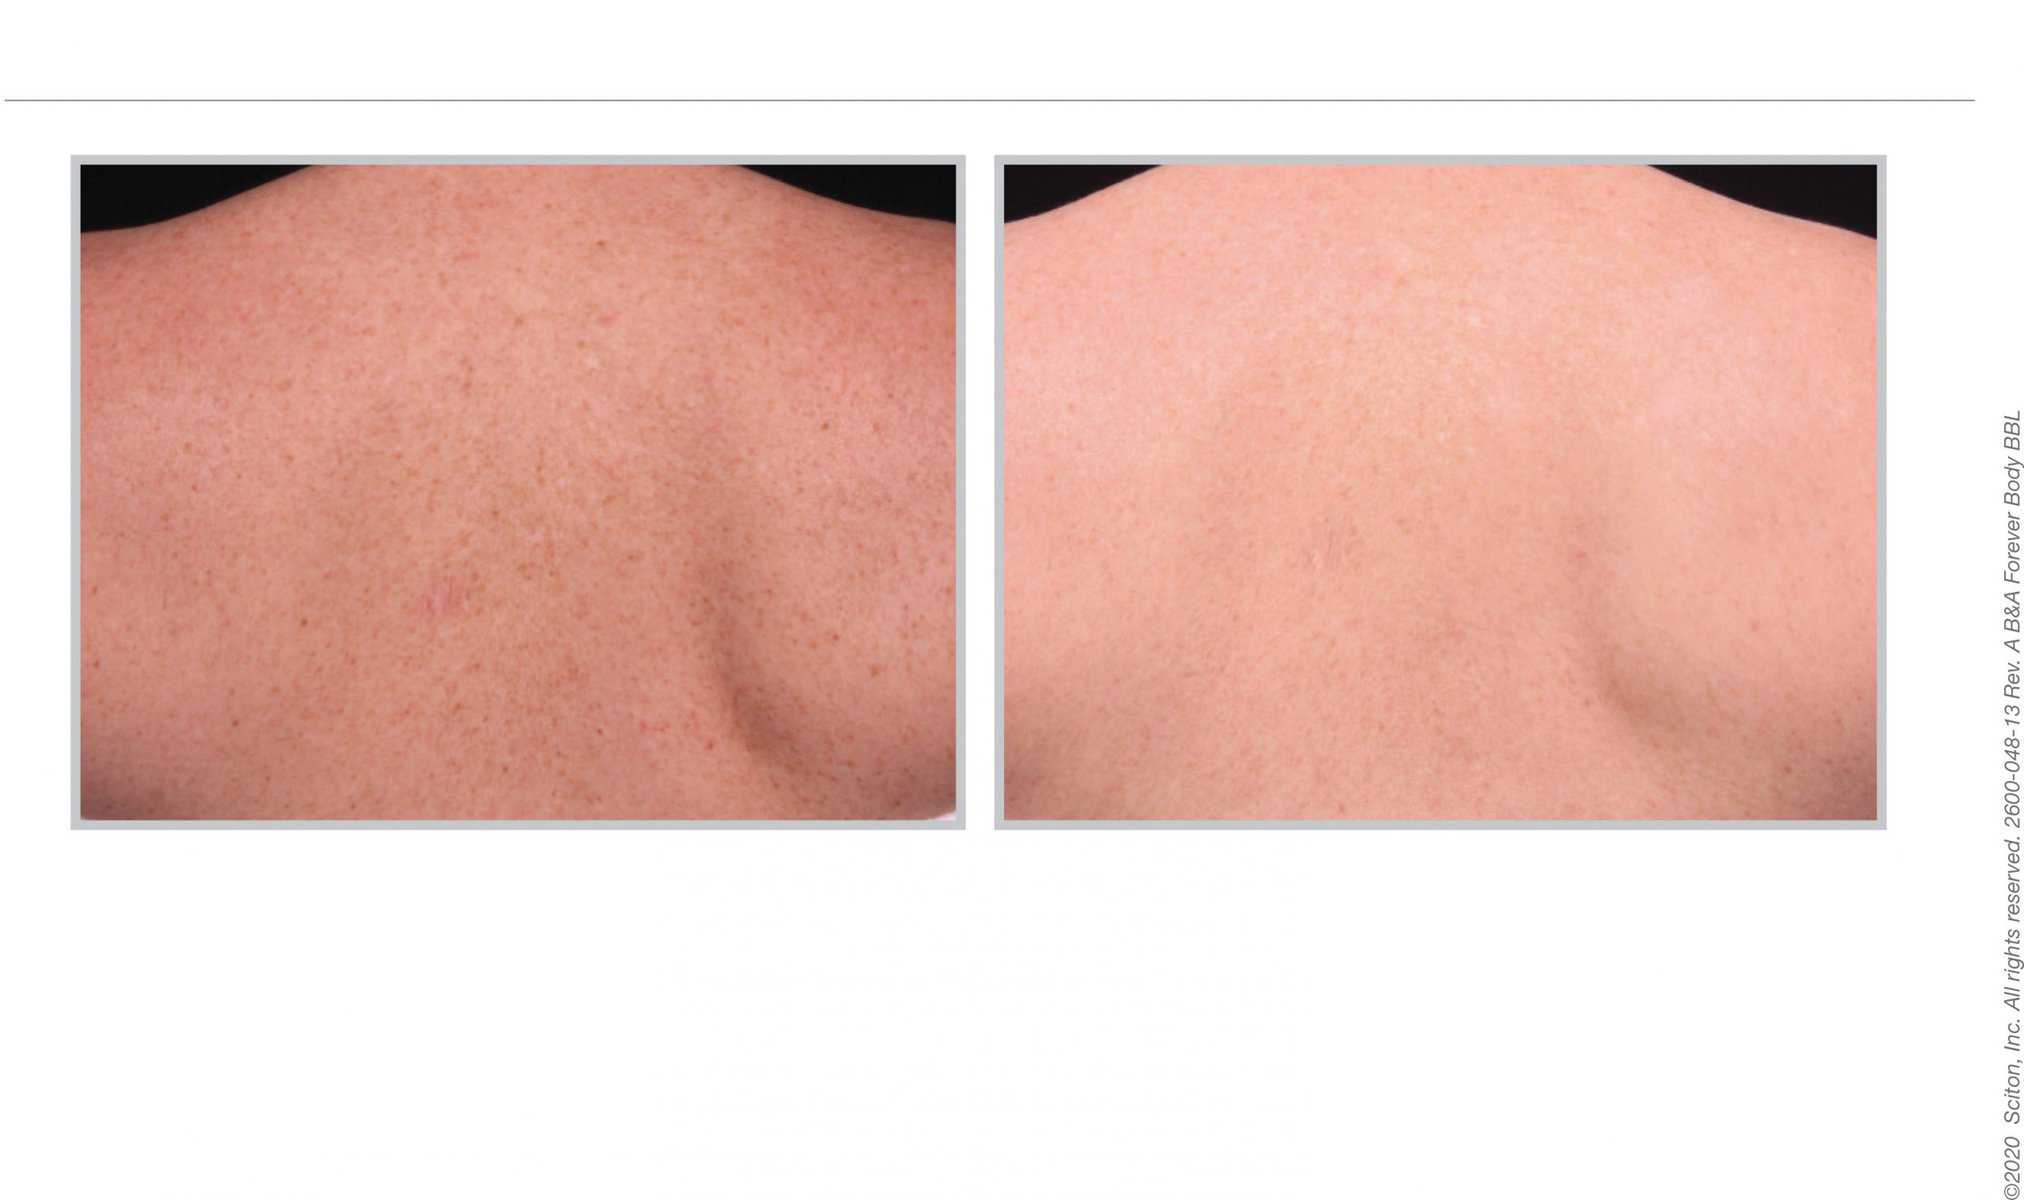 BBL Hero back treatment before and after 08